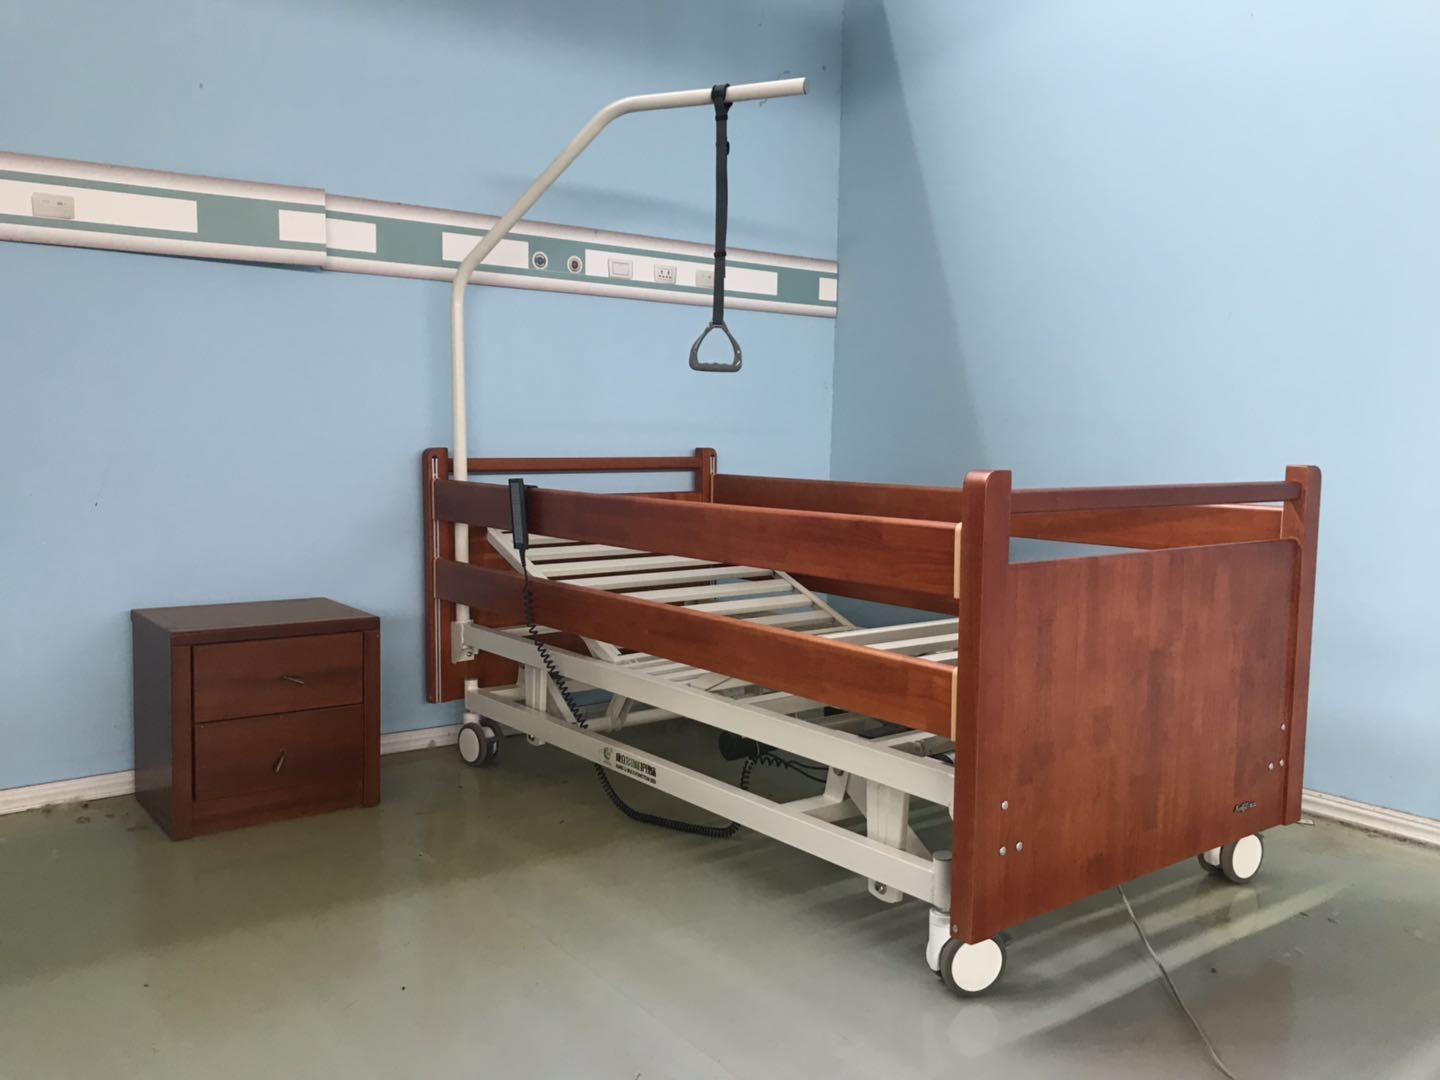 Wooden Hospital Style Beds For Home, Hospital Style Bed Frame